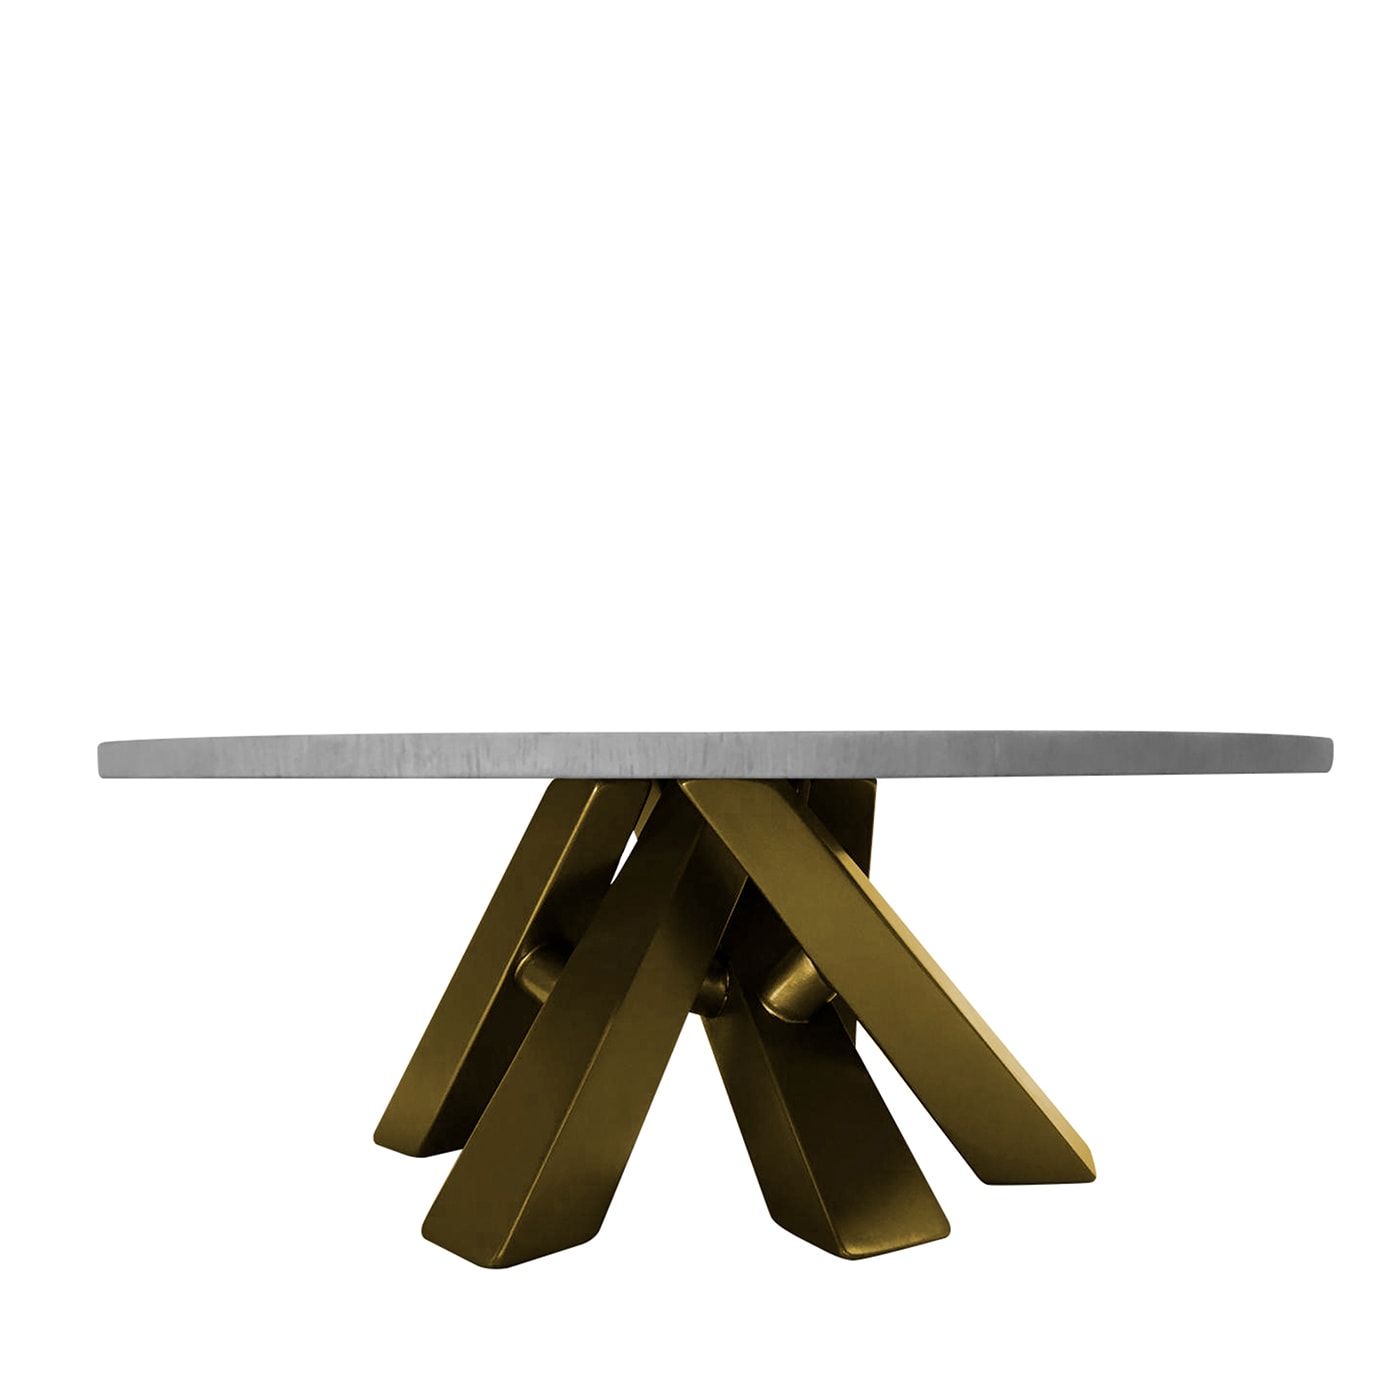 Ies Gray & Bronze Dining Table - Oltrelegno